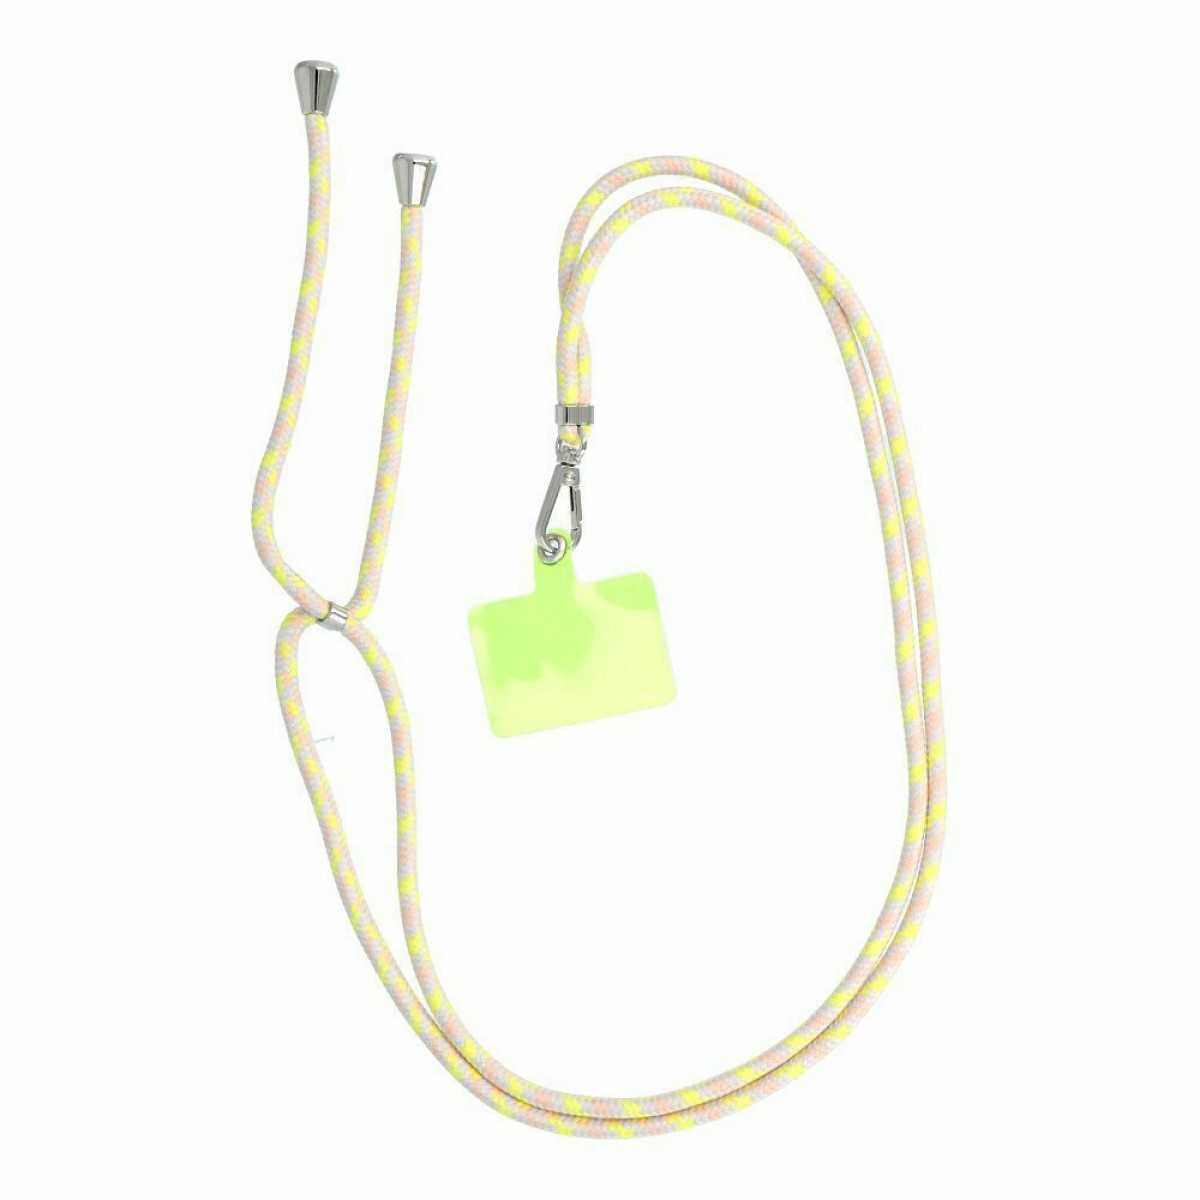 SWING PENDANT FOR THE PHONE WITH ADJUSTABLE LENGTH / CORD LENGTH 165CM GREY / YELLOW